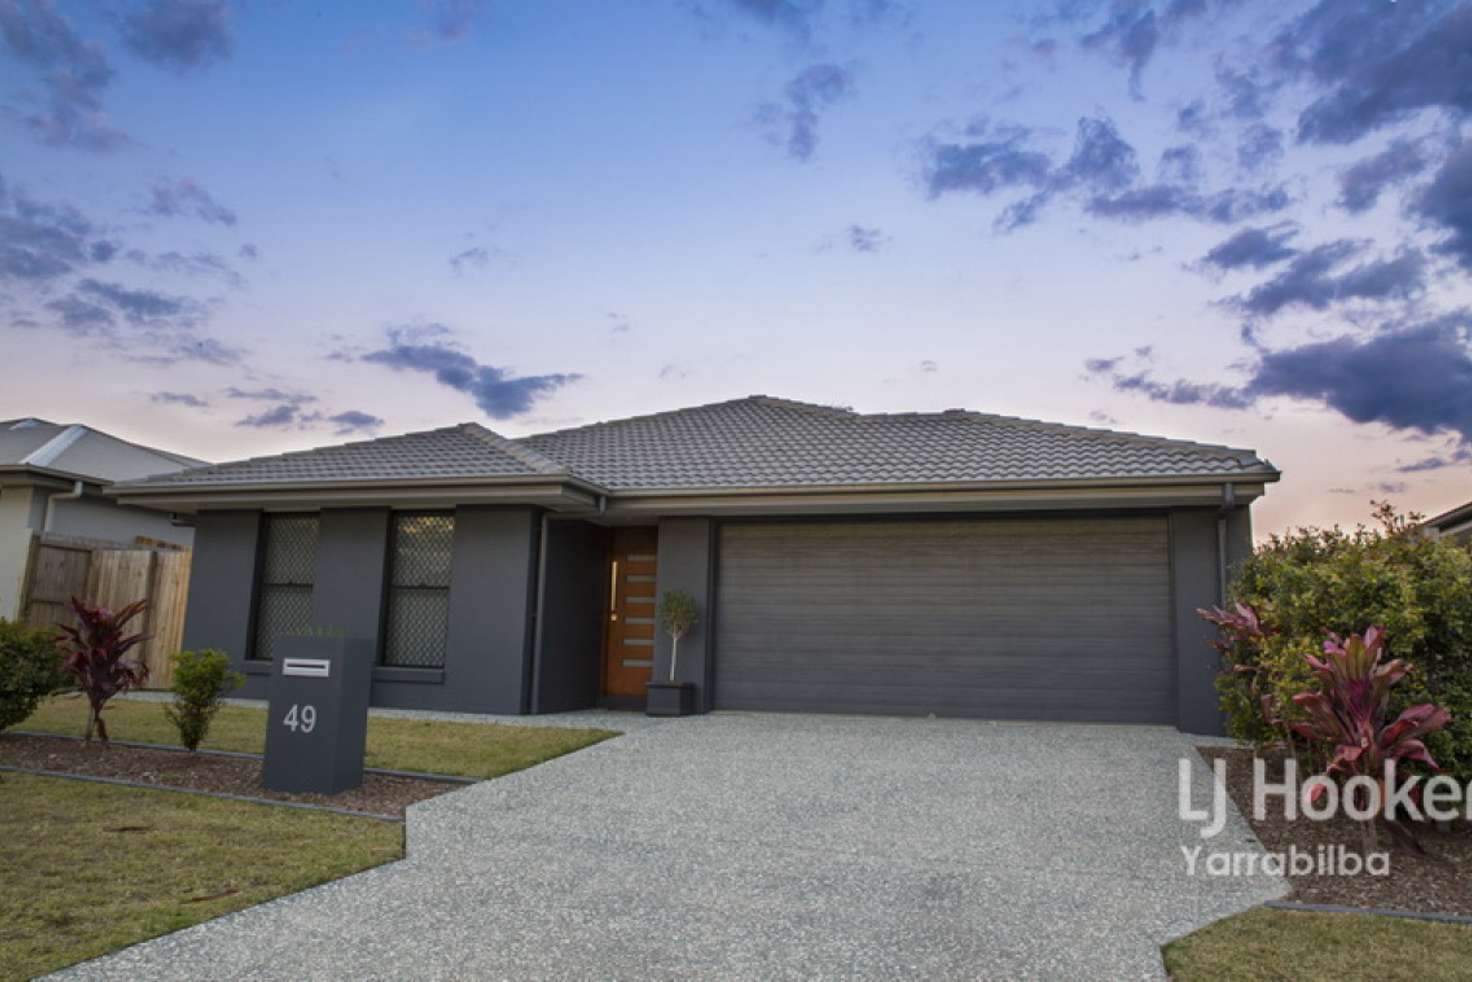 Main view of Homely house listing, 49 Tallwoods Circuit, Yarrabilba QLD 4207